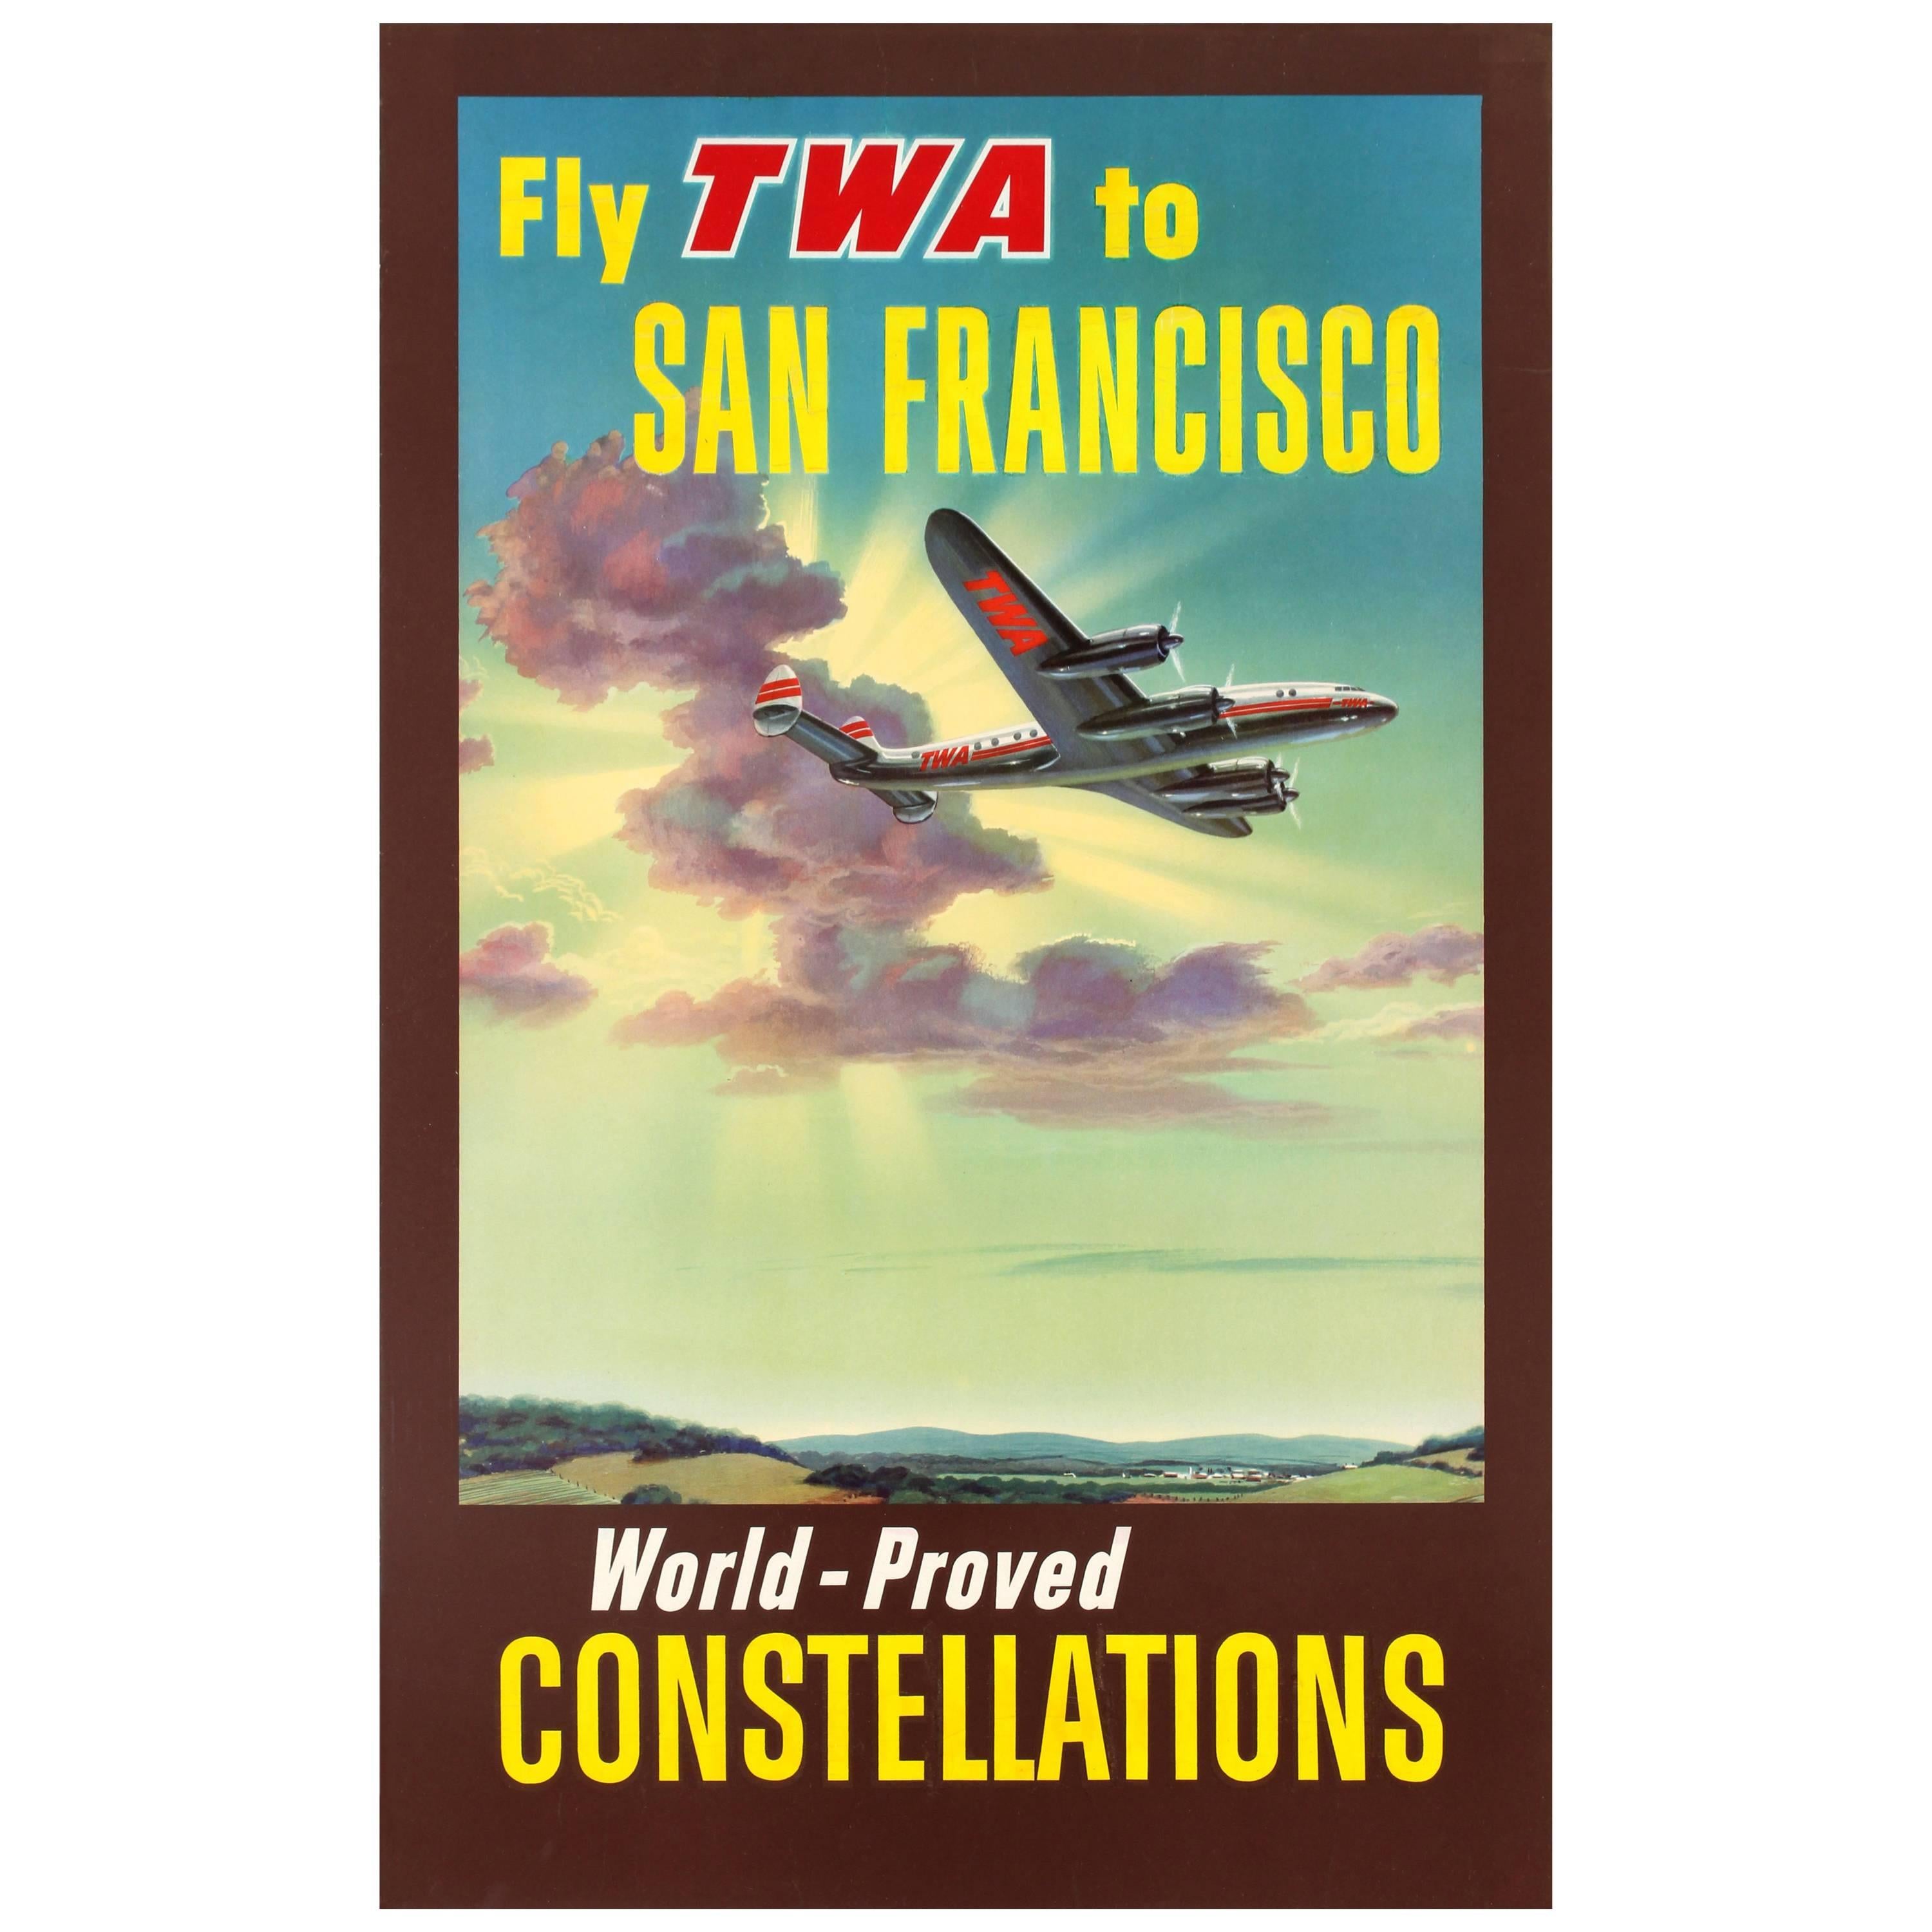 Original Vintage Travel Poster Fly TWA San Francisco World-Proved Constellations For Sale